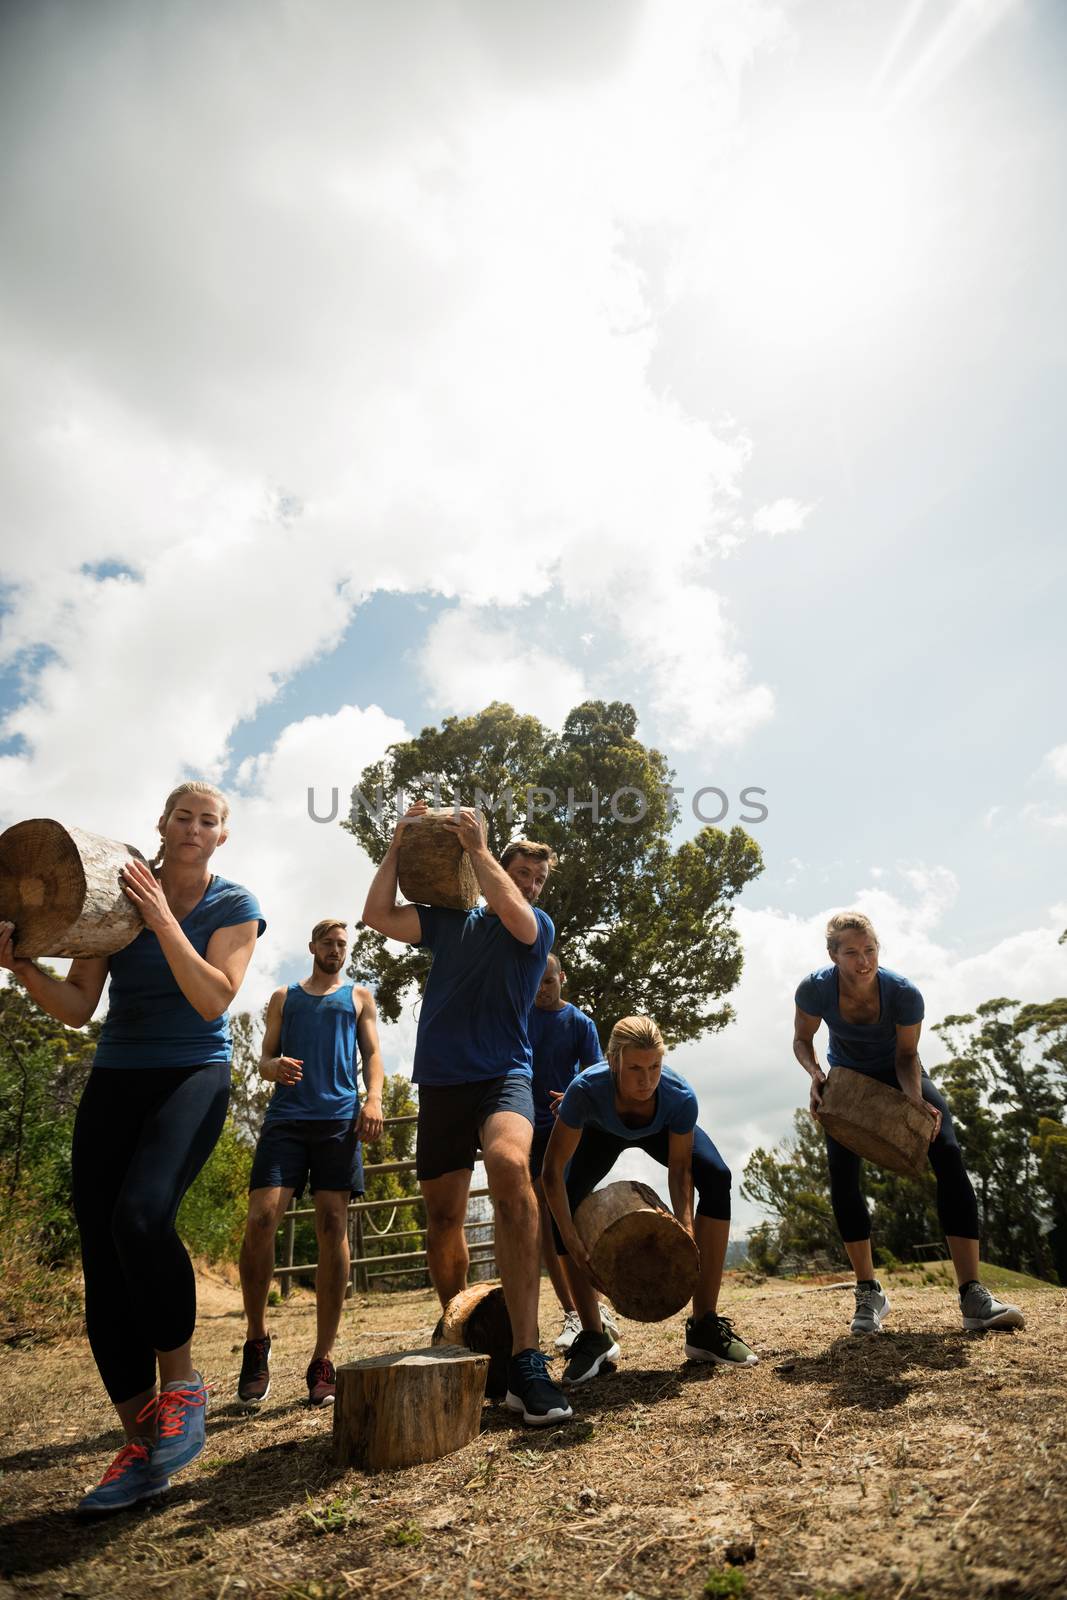 People lifting heavy wooden logs during obstacle course by Wavebreakmedia